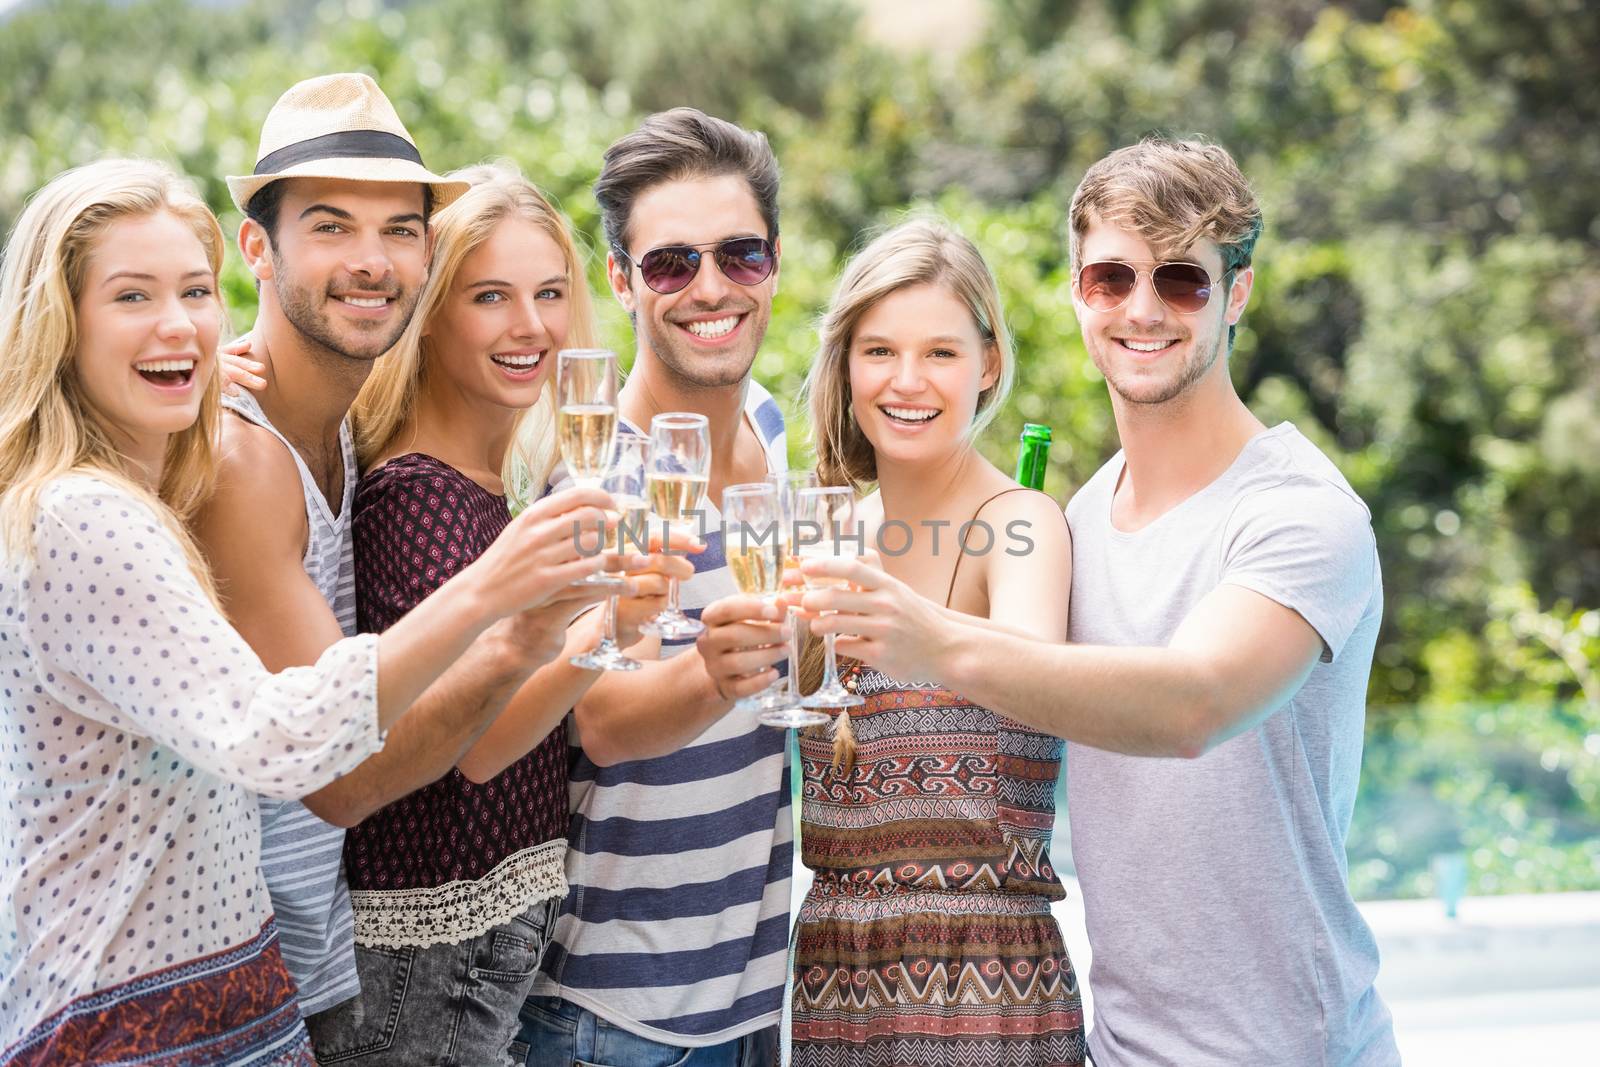 Group of happy friends toasting champagne glasses outdoors